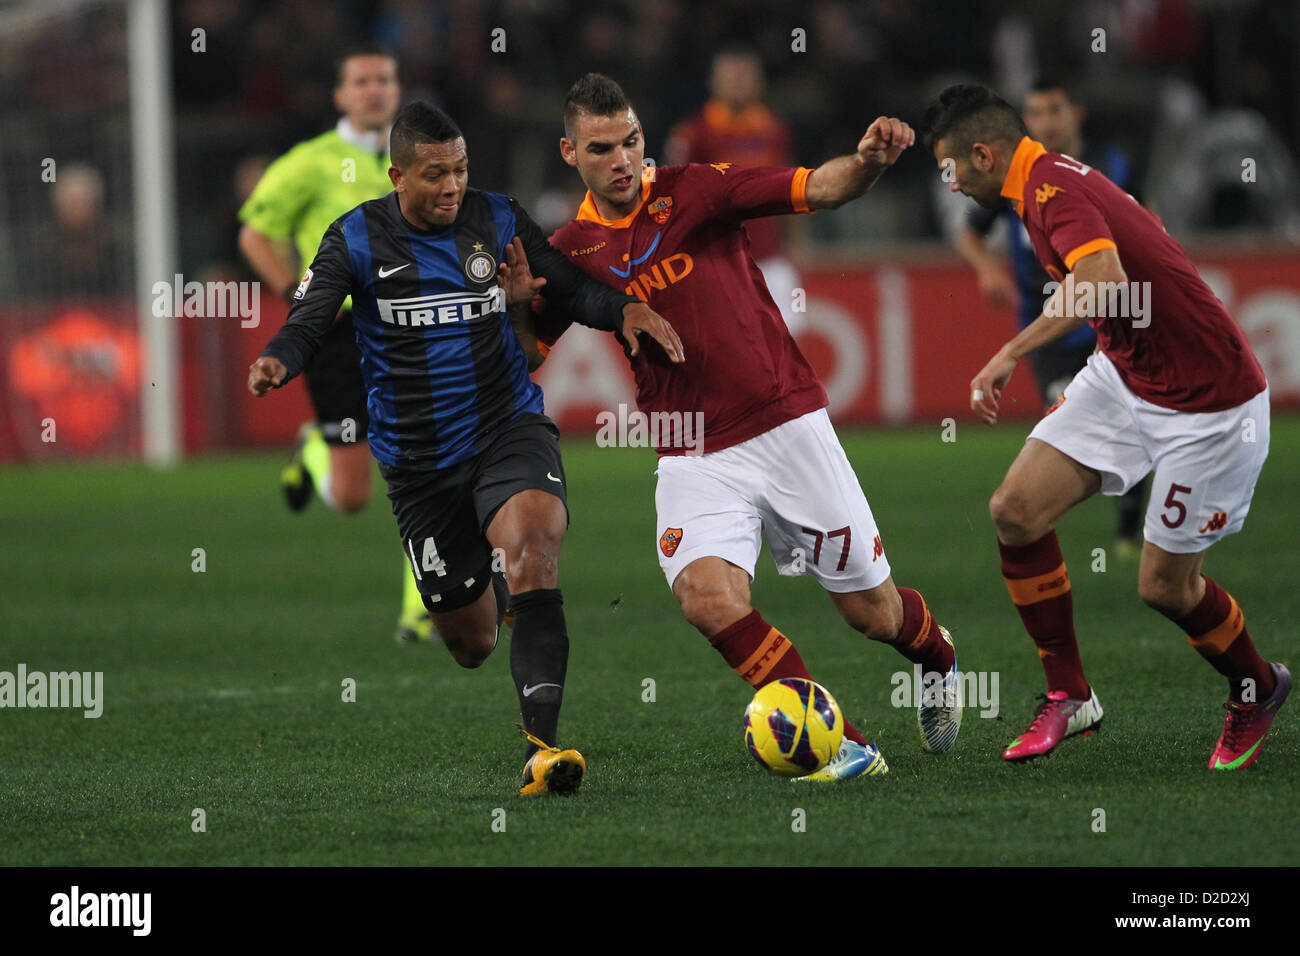 20.01.2013 Rome, Italy. Fredy Guarin and Panagiotis Tachtsidis in action during the Serie A game between Roma and Inter Milan from the Stadio Olympico. Stock Photo